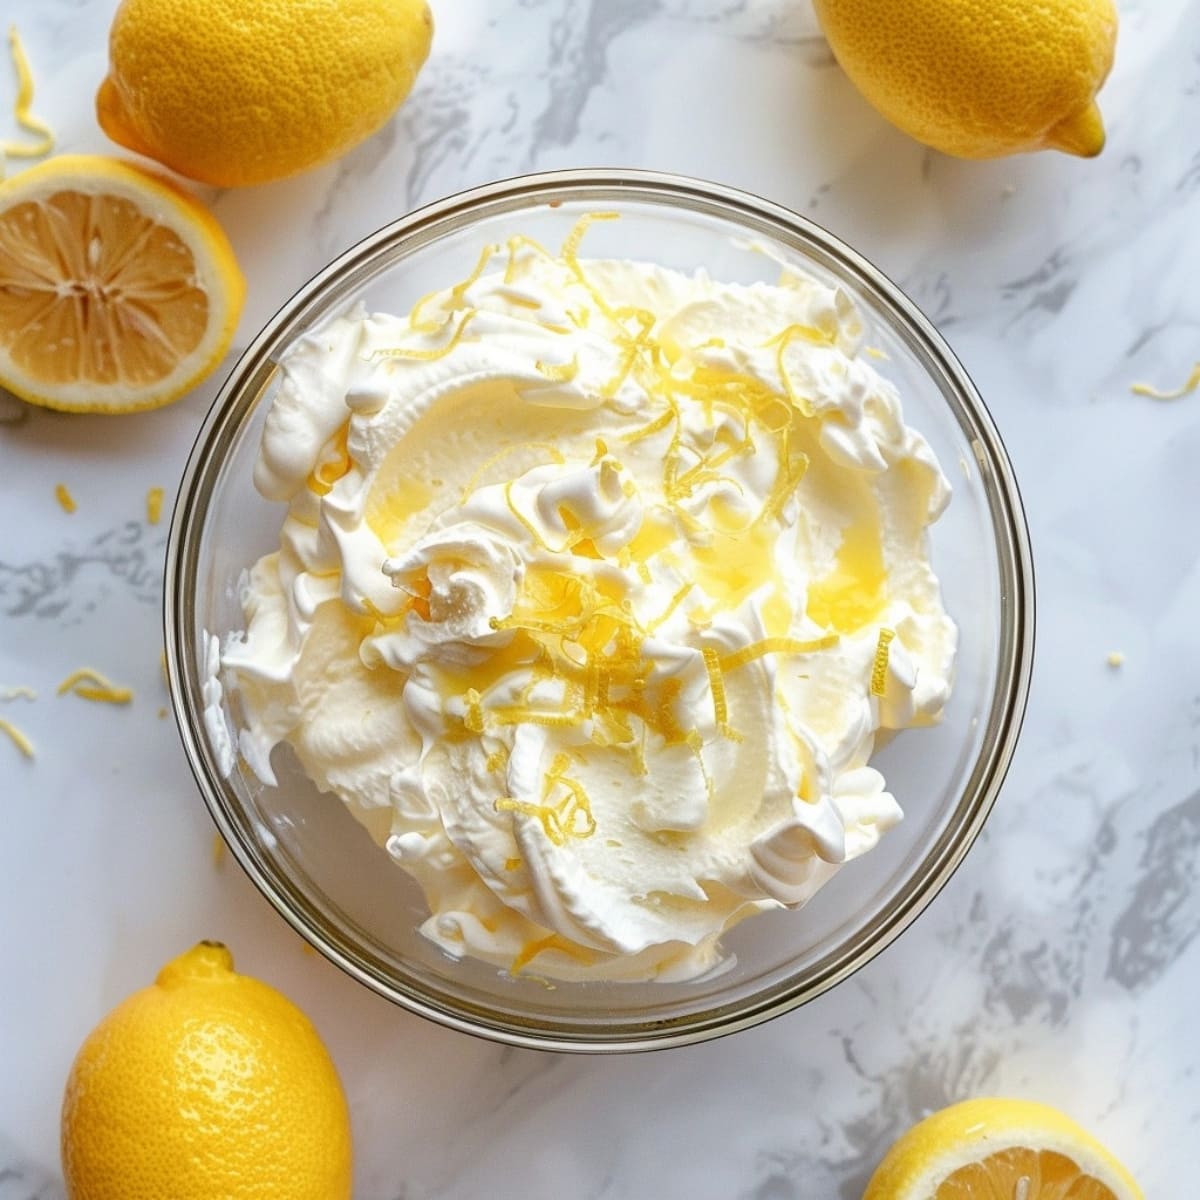 Whipped cream with lemon curd and zest in a glass bowl.